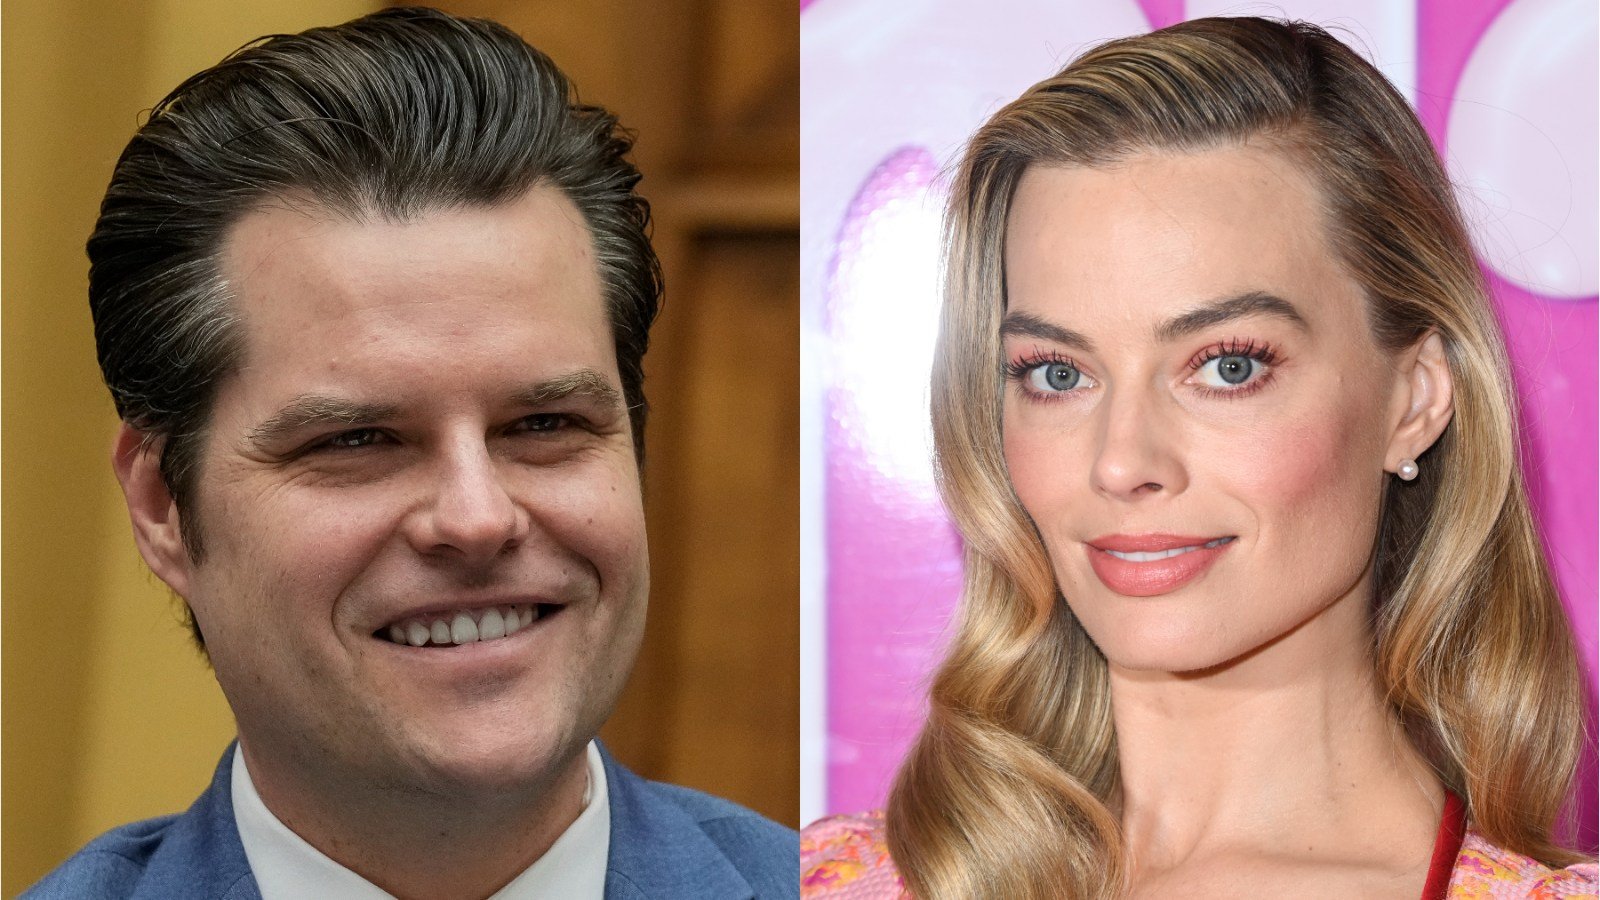 Matt Gaetz Can't Say Margot Robbie Is Hot Without Being Transphobic